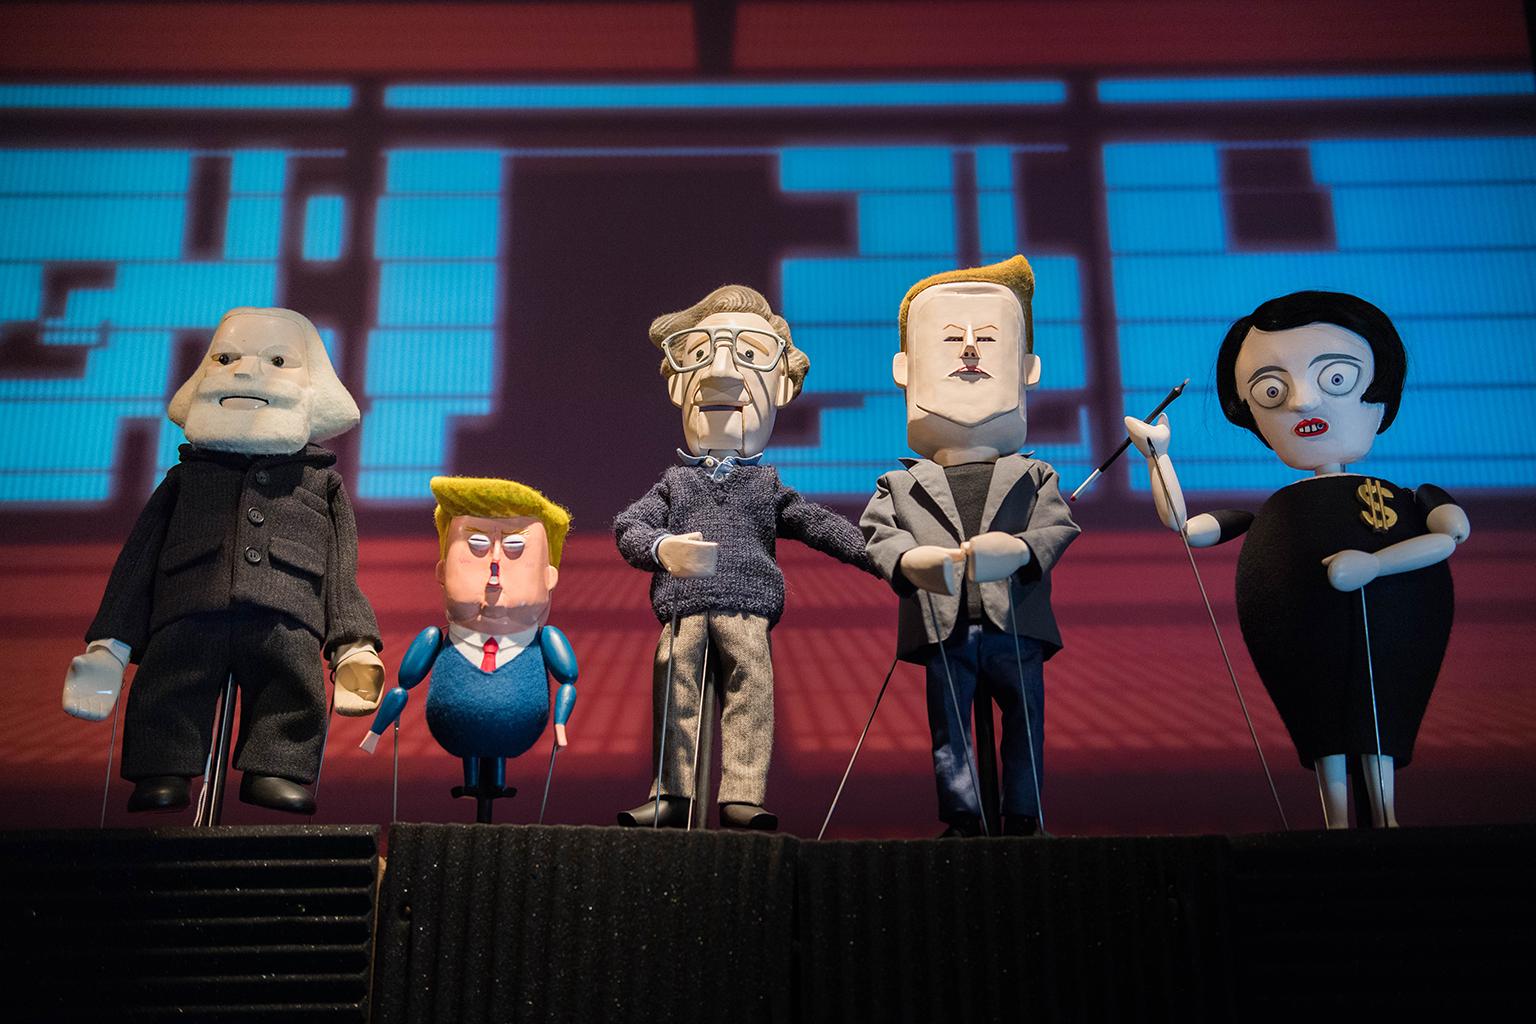 Pedro Reyes’s puppet play “Manufacturing Mischief,”featuring Karl Marx, Tiny Trump, Noam Chomsky, Elon Musk and Ayn Rand. (Photo by Sham Sthankiya April 2018)